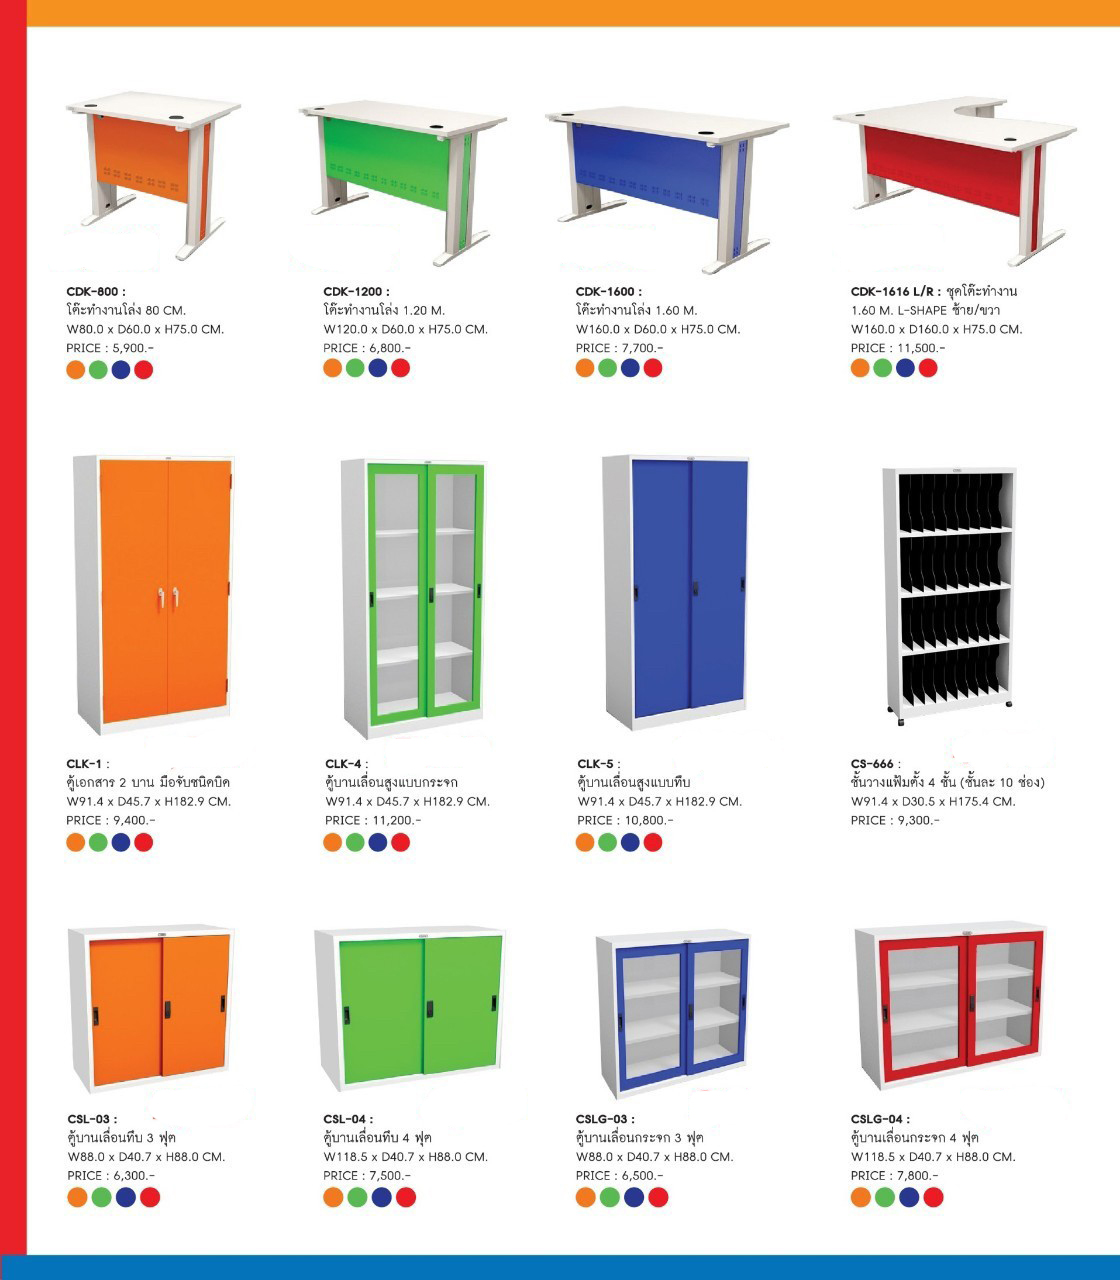 51014::CSLG-03-04::A Sure steel cabinet with sliding glass doors. Dimension (WxDxH) cm : 88x40.7x88/118.5x40.7x88. Available in Orange, Green, Blue and Red Metal Cabinets